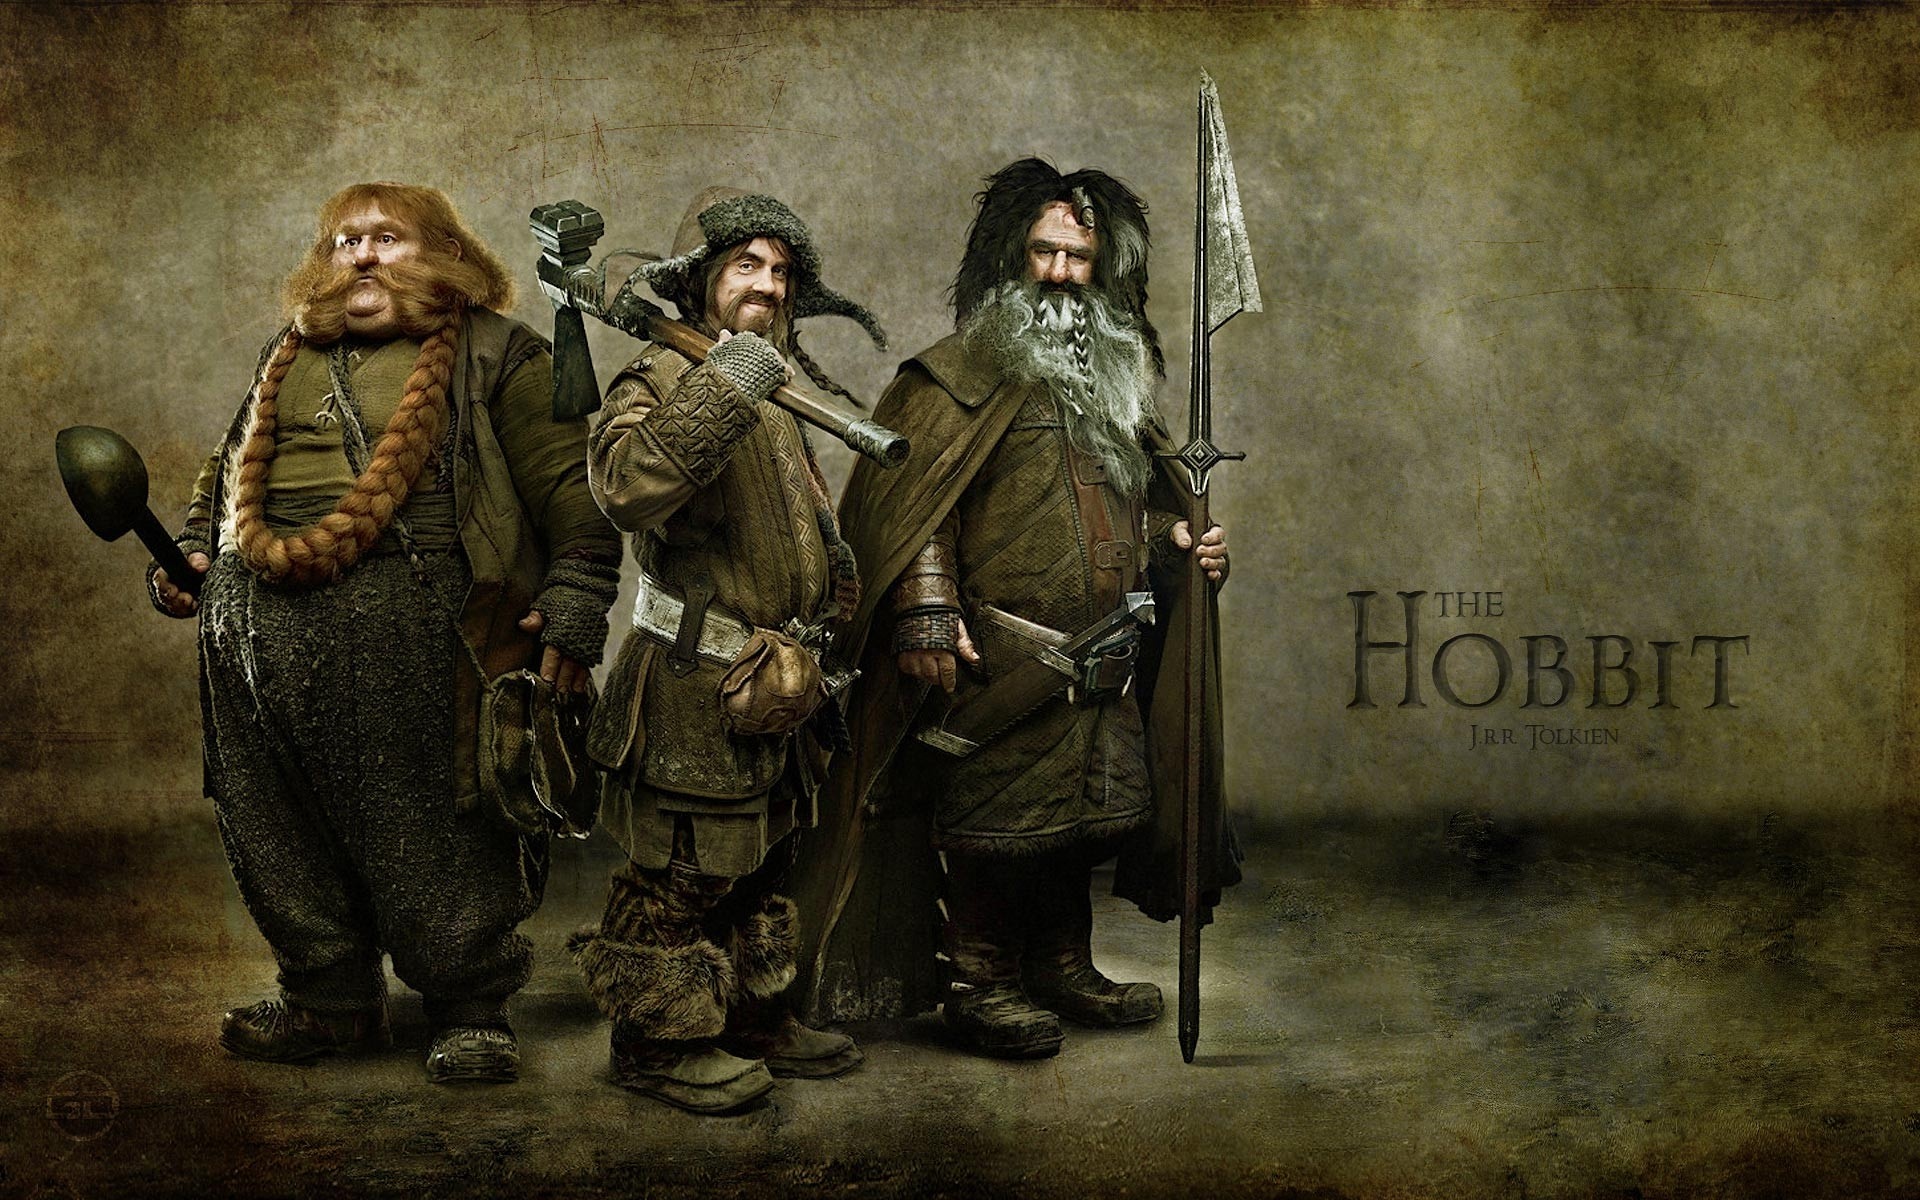 Dwarves (The Lord of the Rings): The Kingdom under the Mountain, Arkenstone, Durin's Folk. 1920x1200 HD Background.